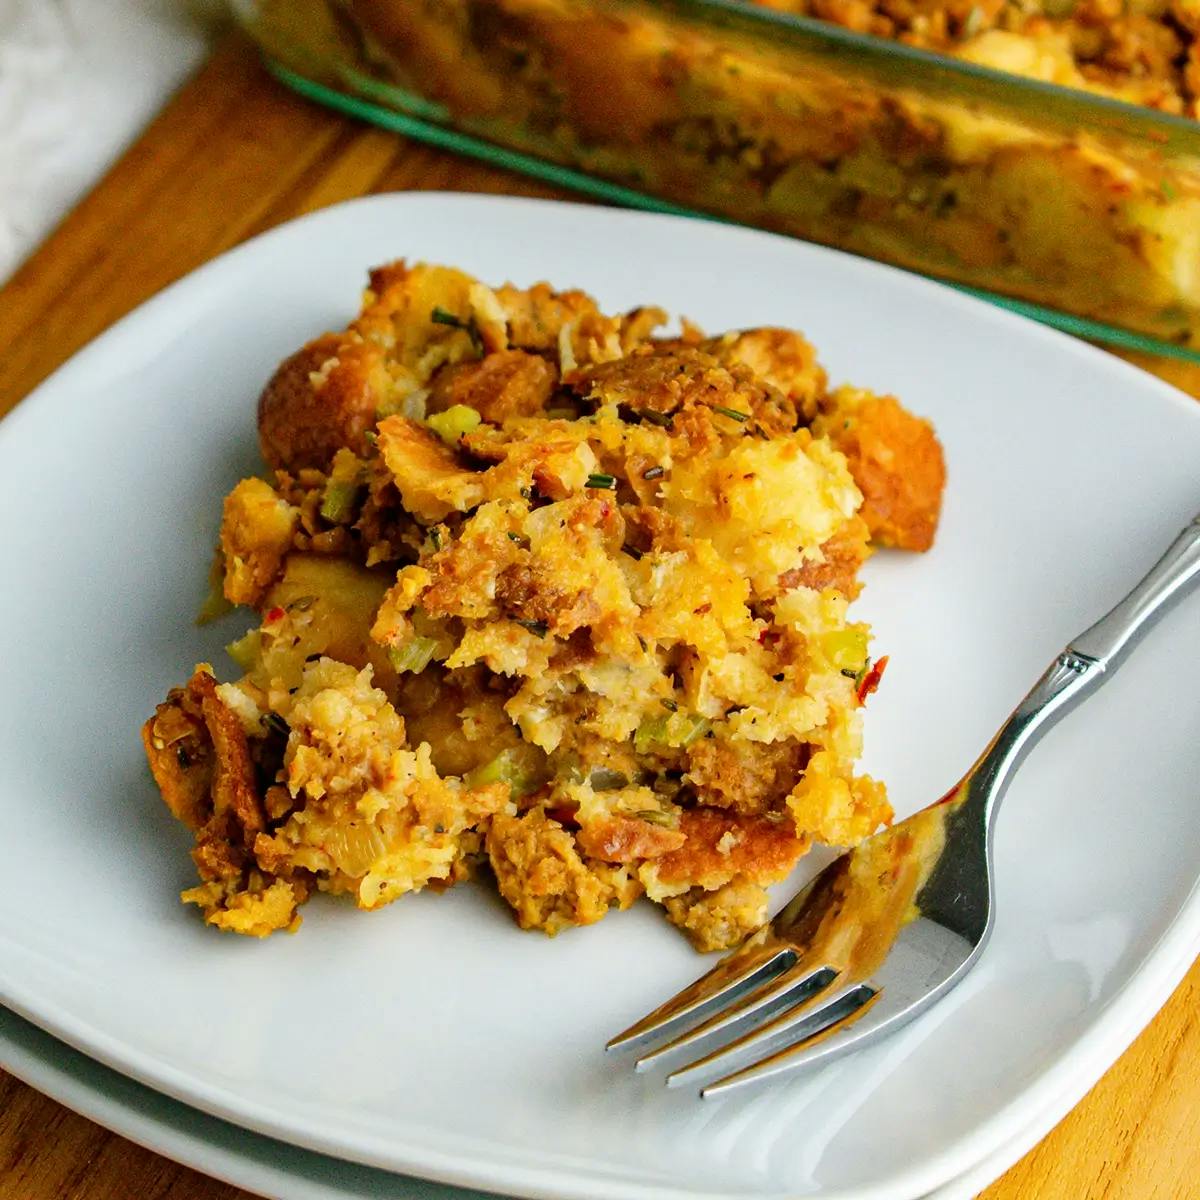 A portion of vegan stuffing on a plate.